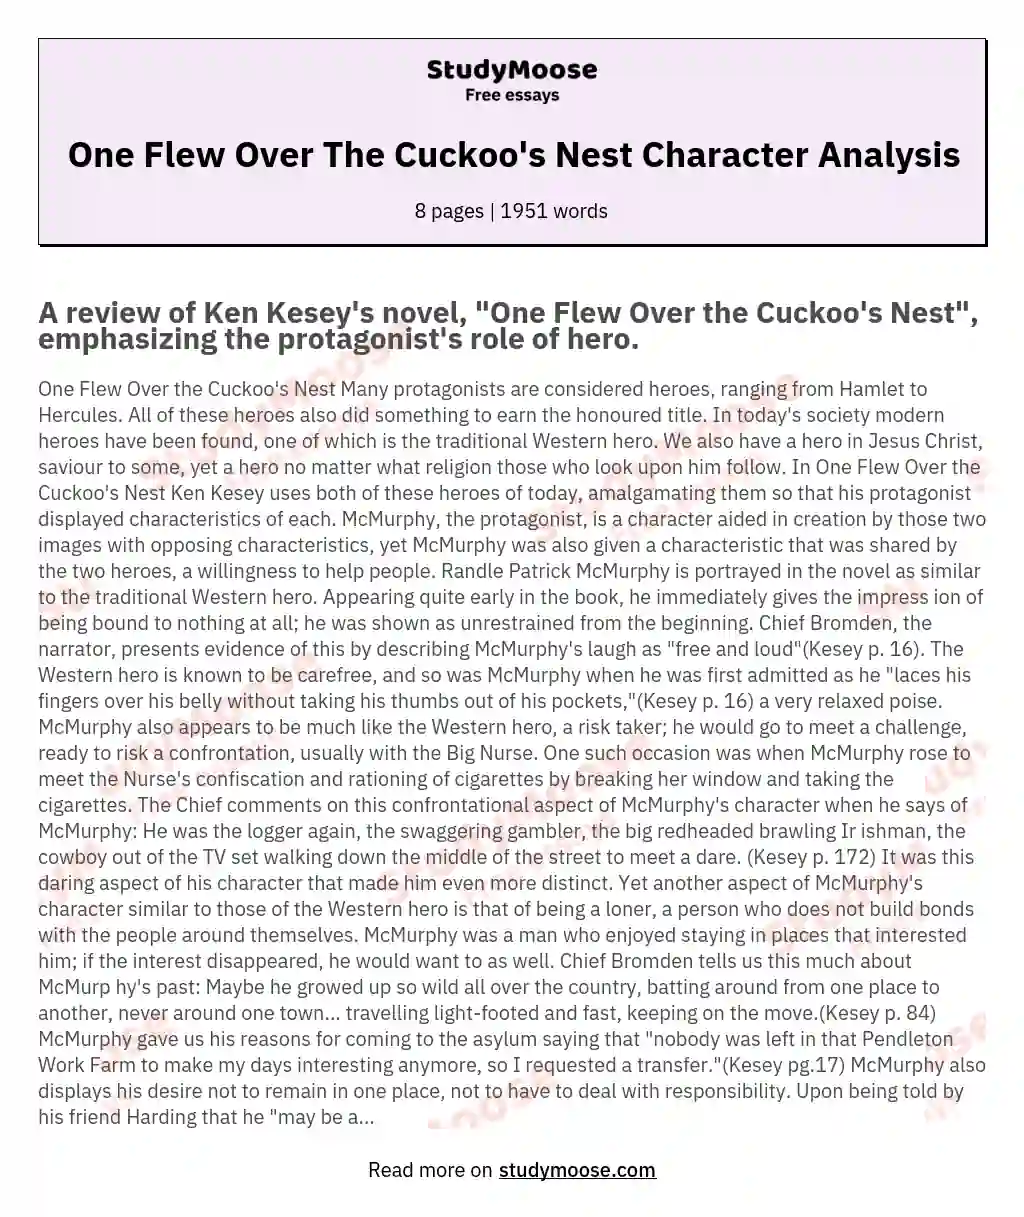 thesis statement for one flew over the cuckoo's nest